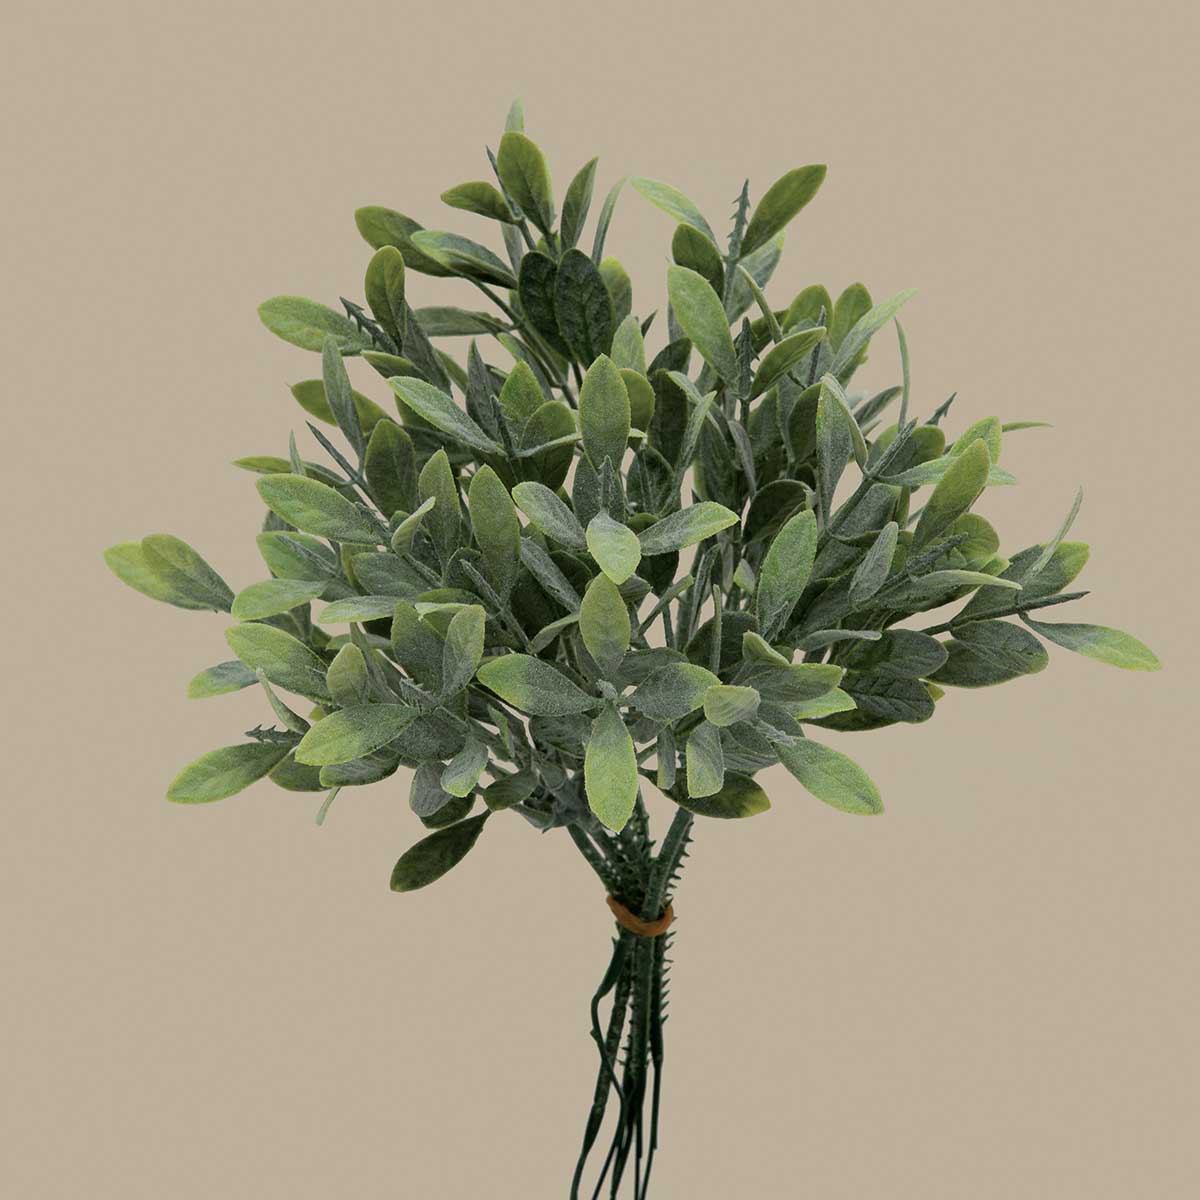 BUNDLE OF 6 FLOCKED SAGE LEAF 6IN X 9IN GREEN - Click Image to Close